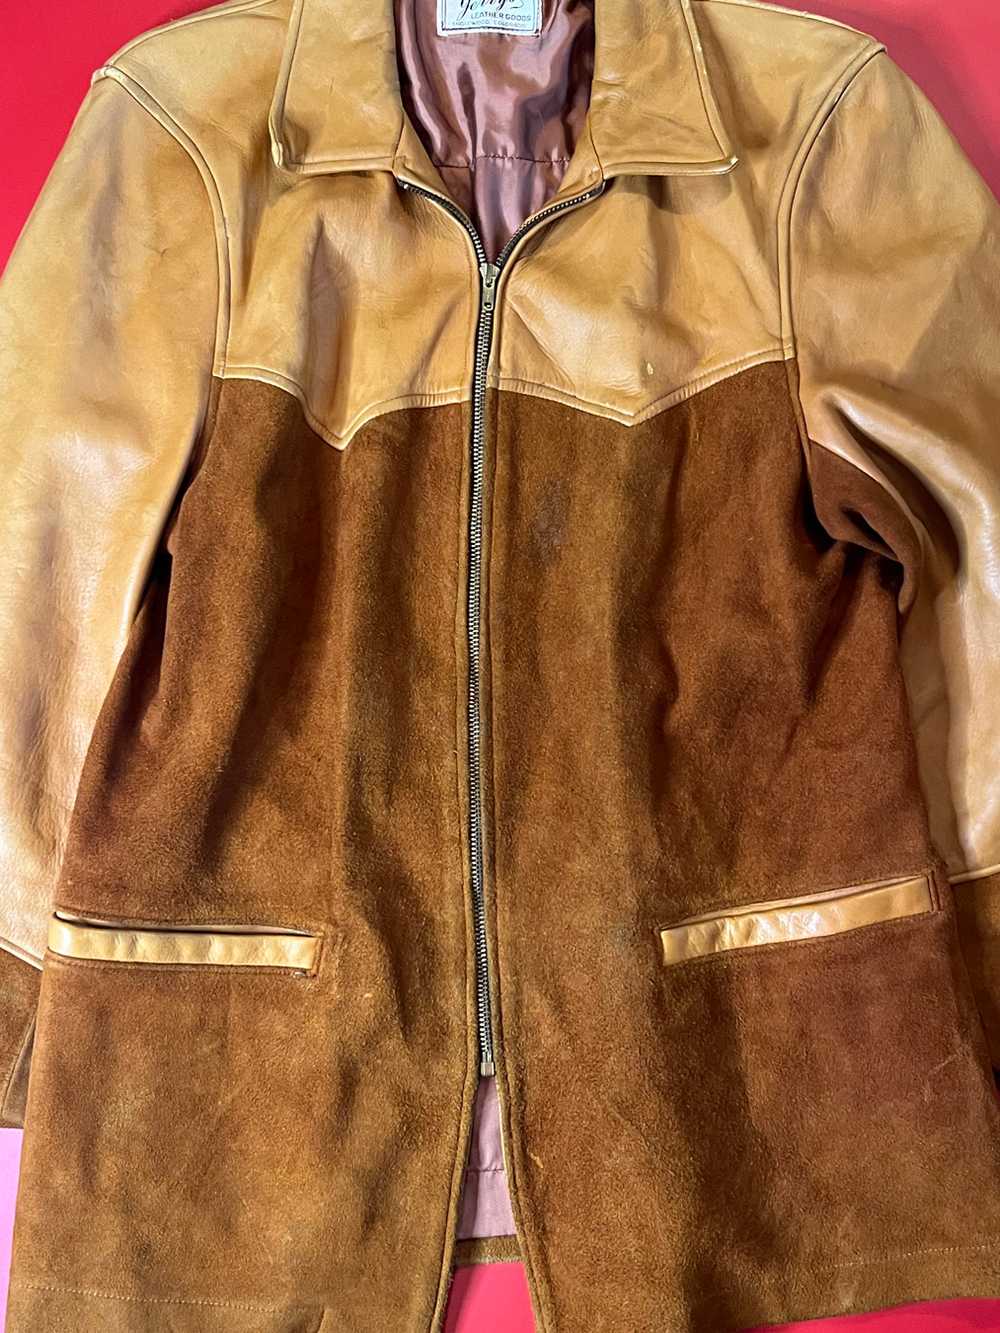 70’s Leather & Suede Long Coat - image 2